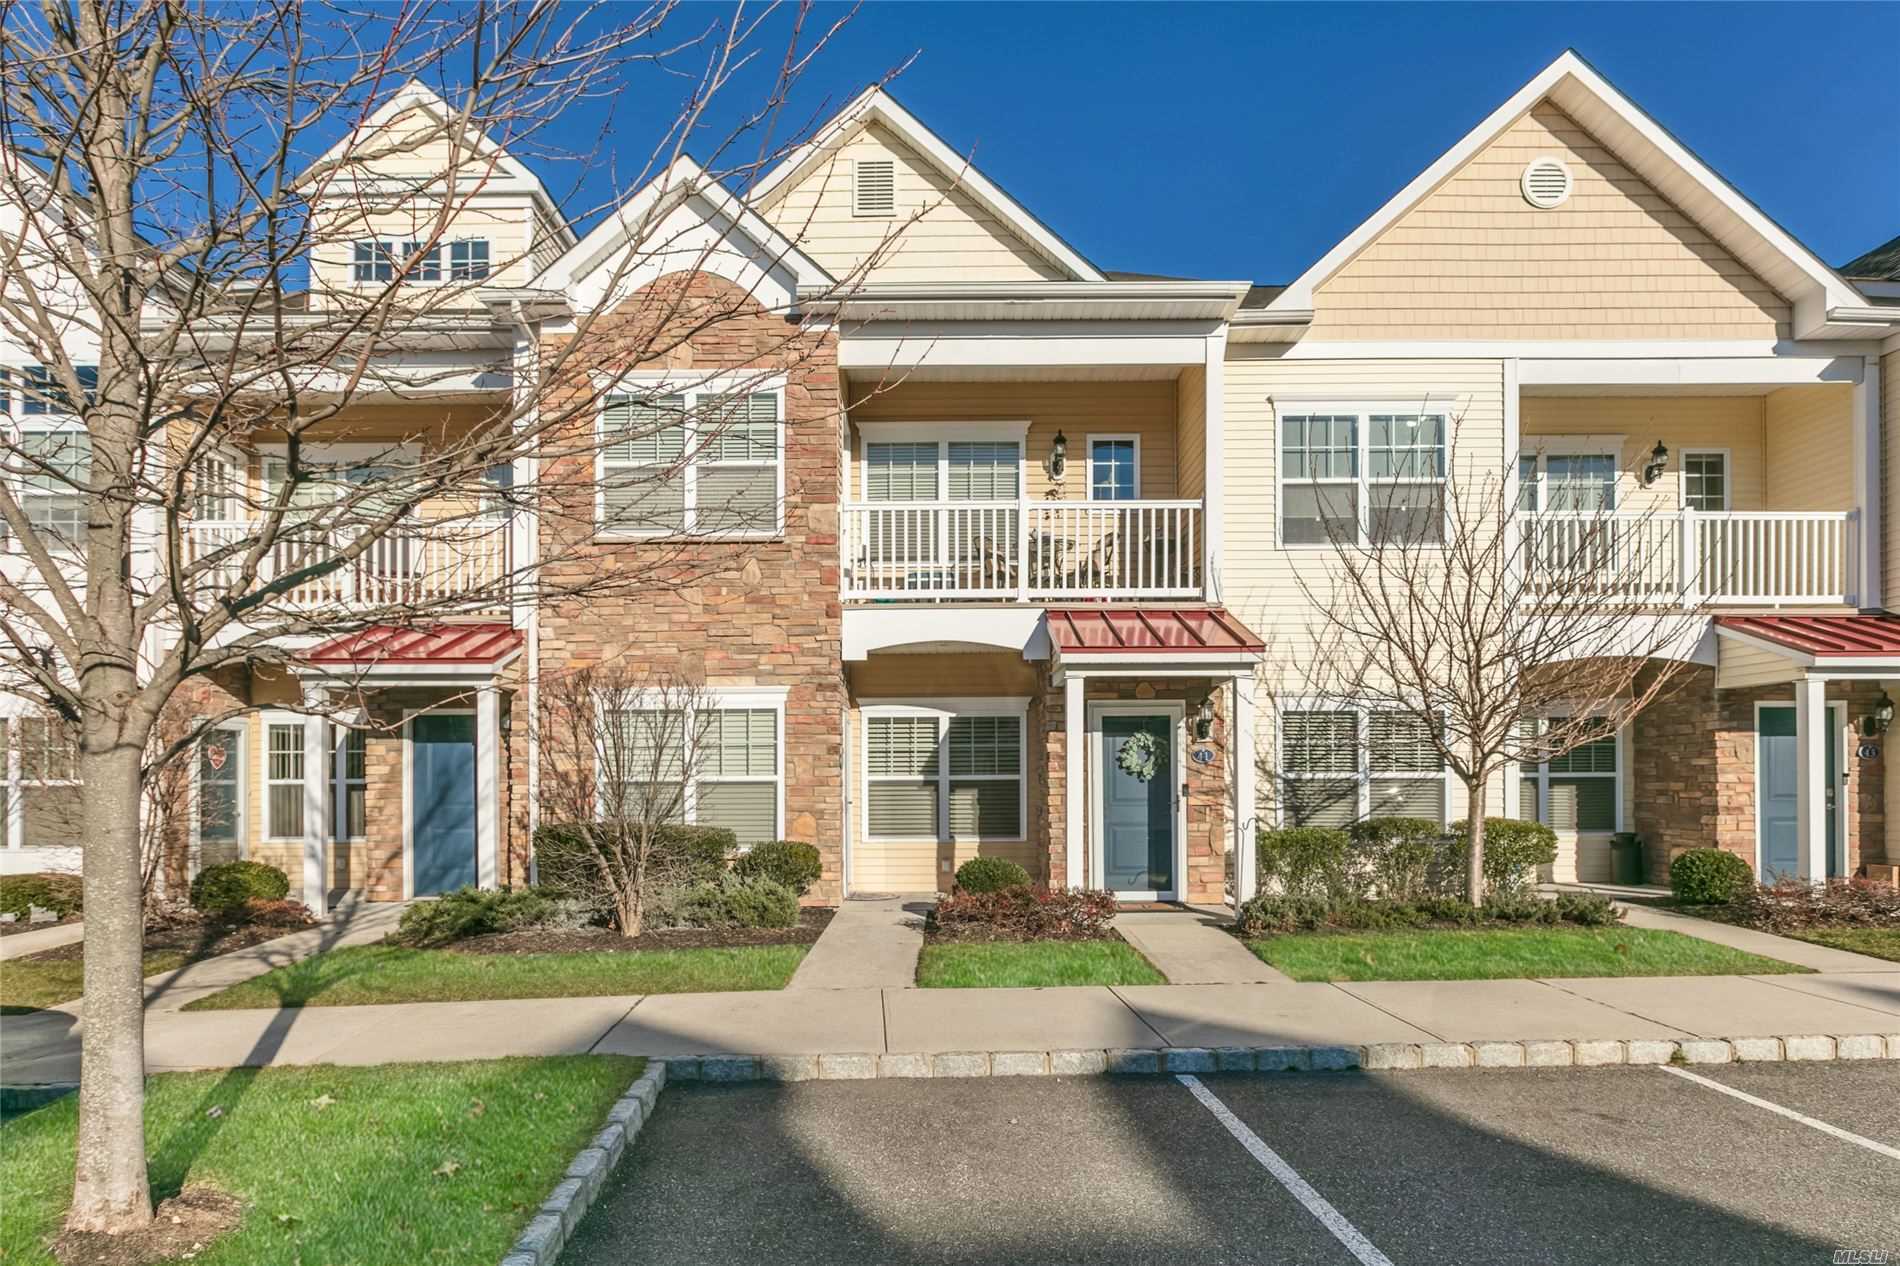 This Beautiful condo is located in the heart of Patchogue Village & walking distance to all the Village has to offer. New porcelain flooring, 9&rsquo; Ceilings, Recessed lighting, Granite kitchen, new trendy slash-back, Stainless appliances & new master bathroom. Walking distance to Village amenities including, LIRR, grocery store, library, theater & more.